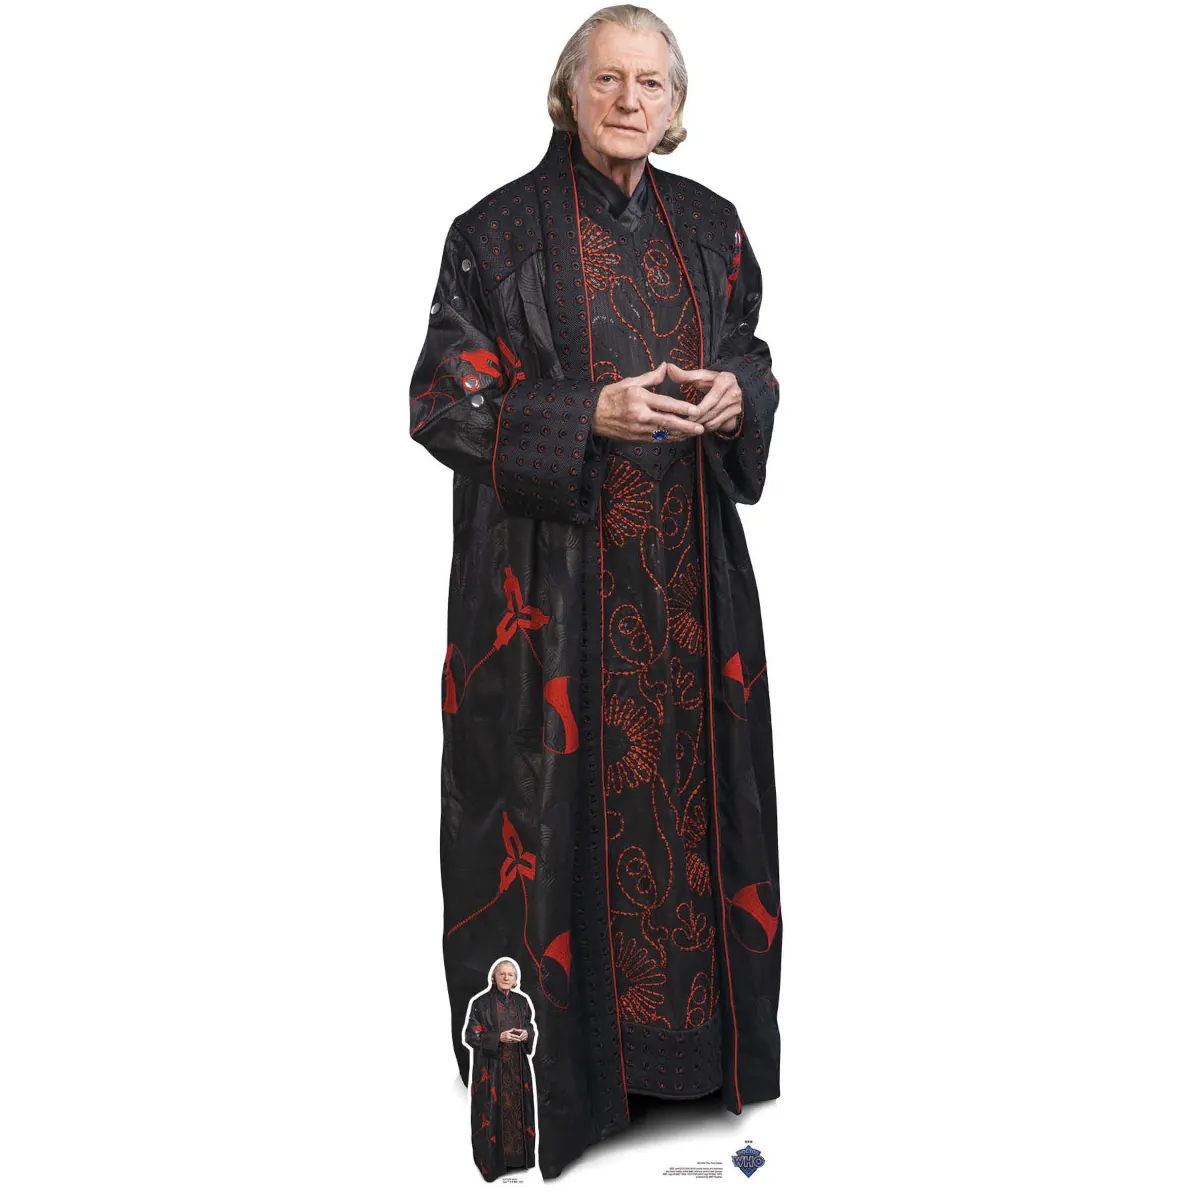 SC4192 The First Doctor 'David Bradley' (Doctor Who) Lifesize + Mini Cardboard Cutout Standee Front